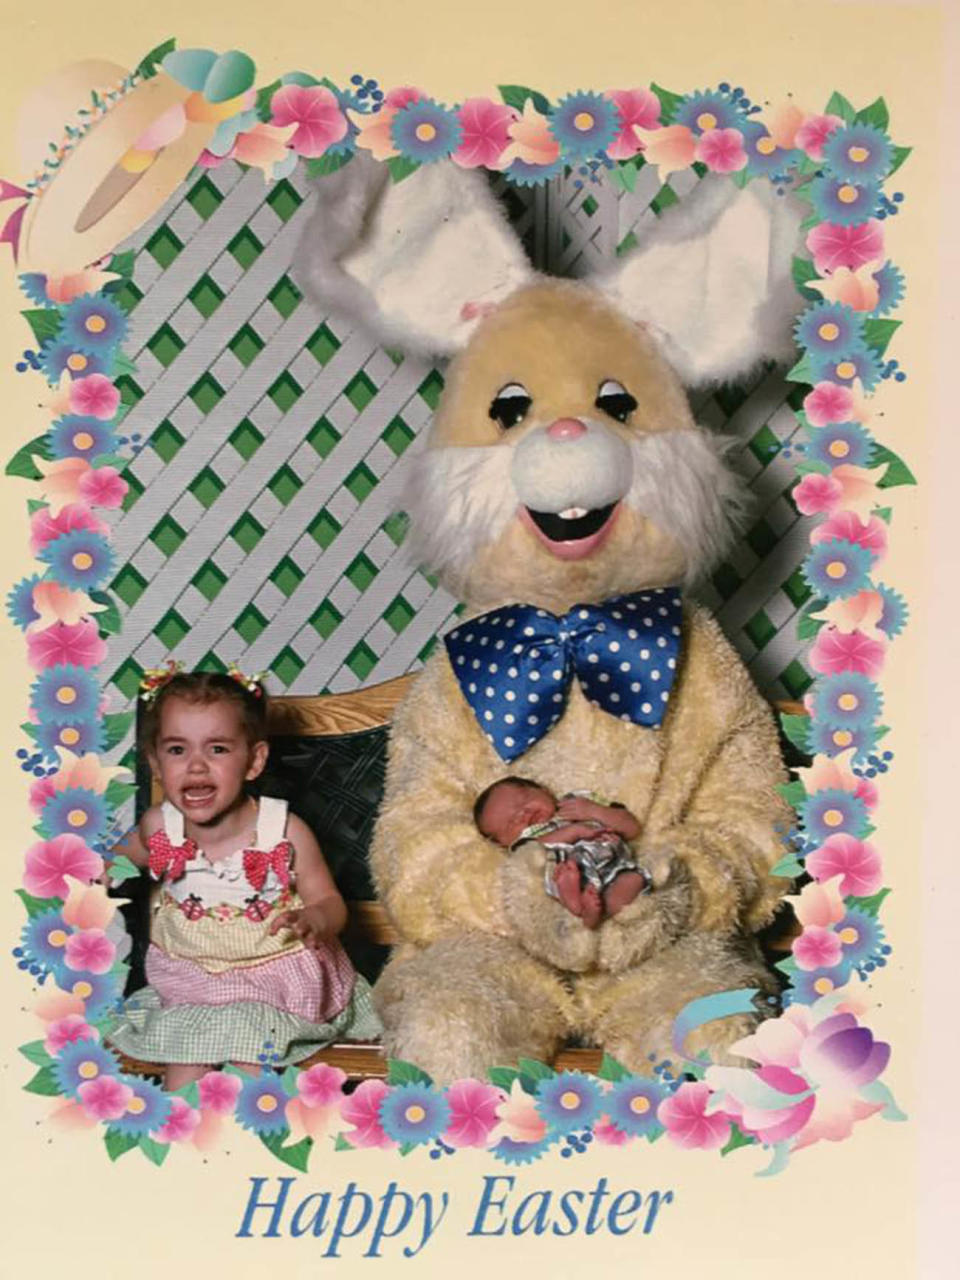 Dirtiest, stinkiest and most disgusting Easter Bunny EVER with my terrified daughter and tiny baby.